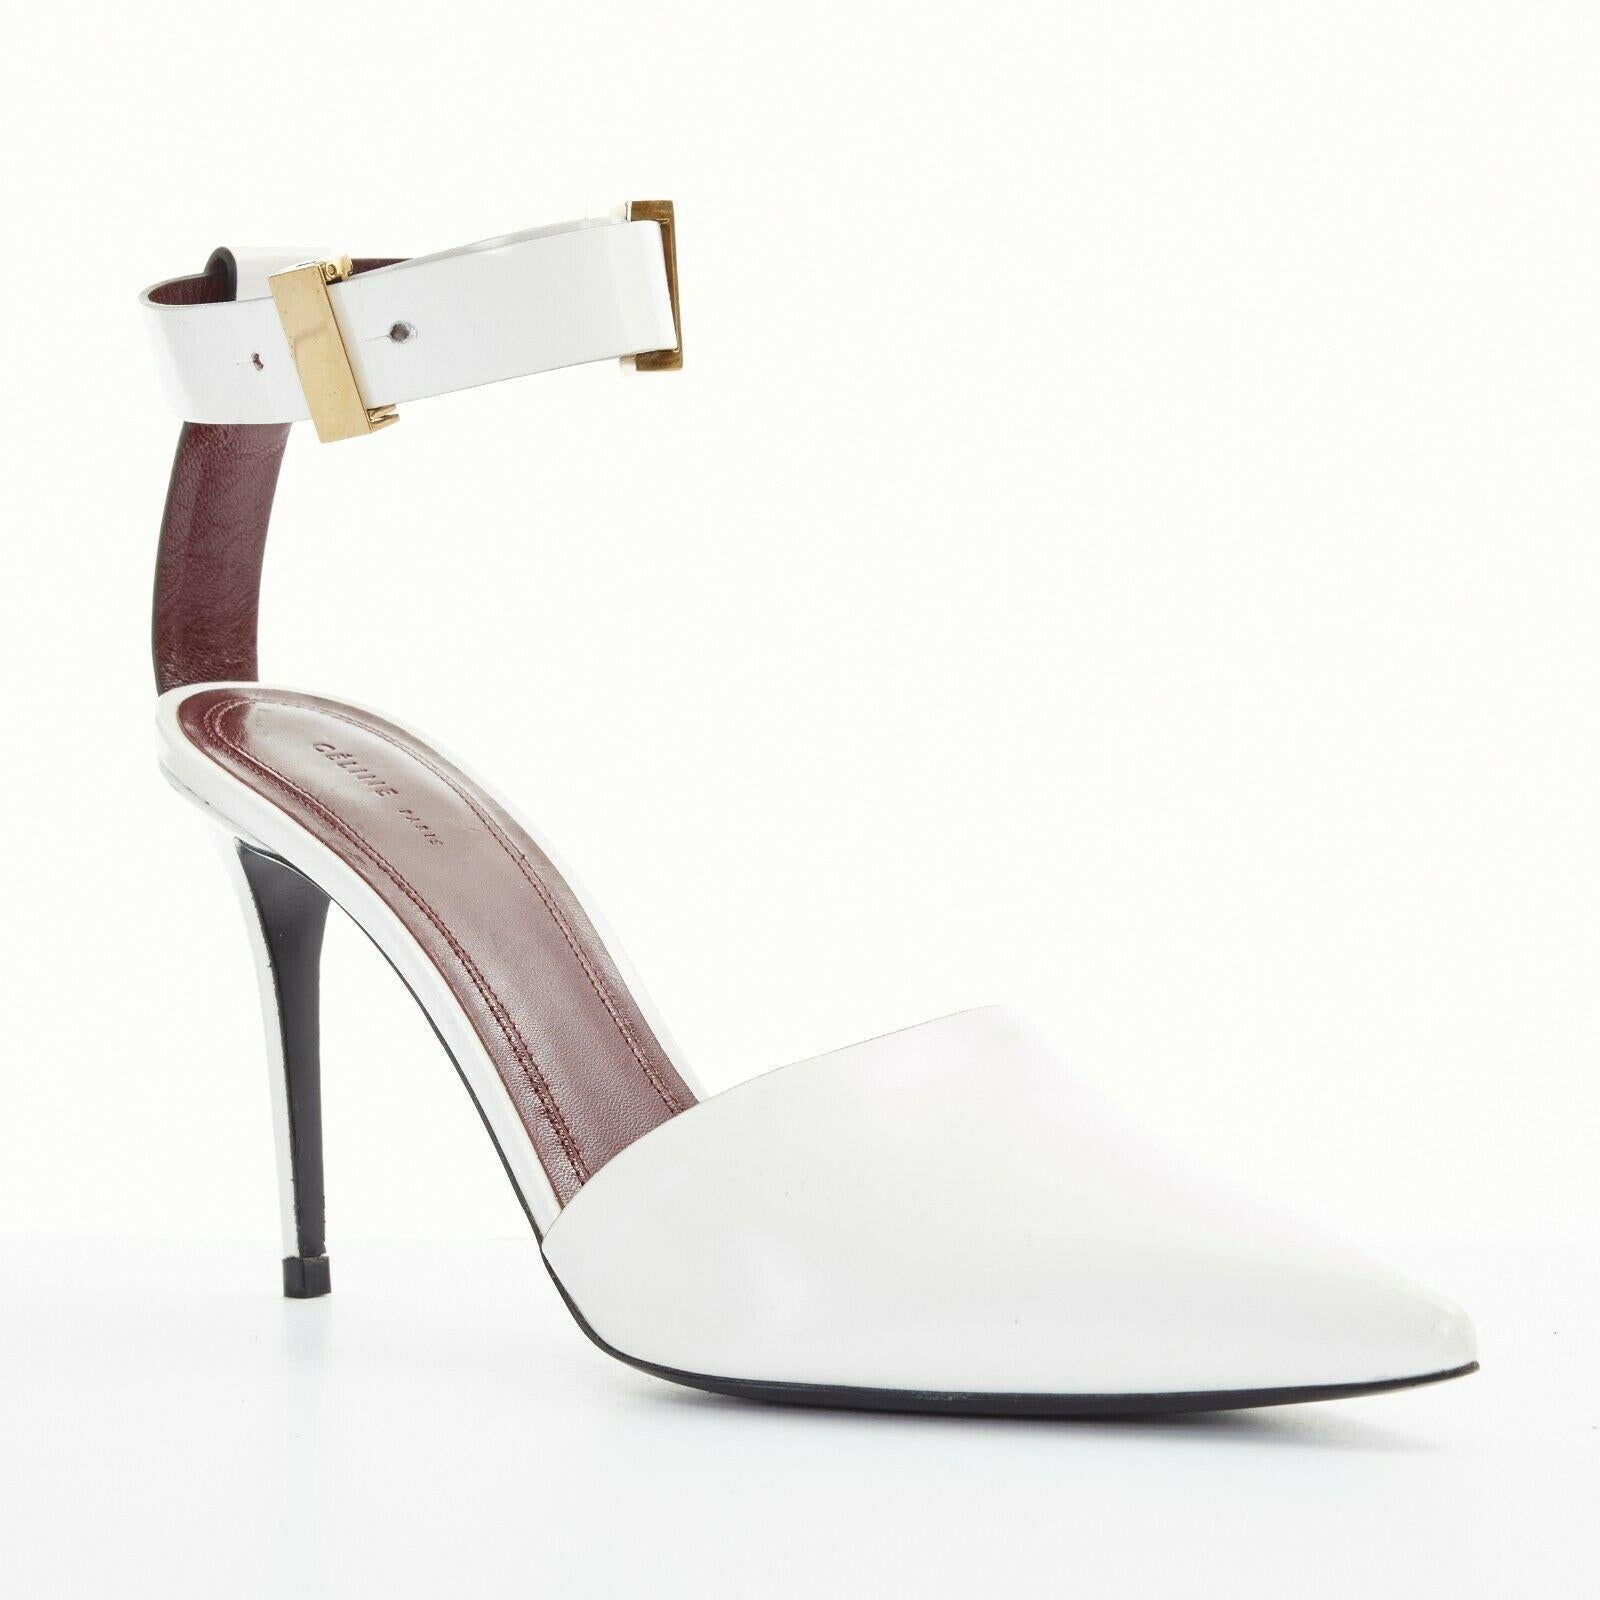 CELINE PHILO white leather point toe gold hardware ankle strap dorsay heel EU39 
Reference: TGAS/A02762 
Brand: Celine 
Designer: Phoebe Philo 
Material: Leather 
Color: White 
Pattern: Solid 
Closure: Ankle Strap 
Extra Detail: White glossy leather